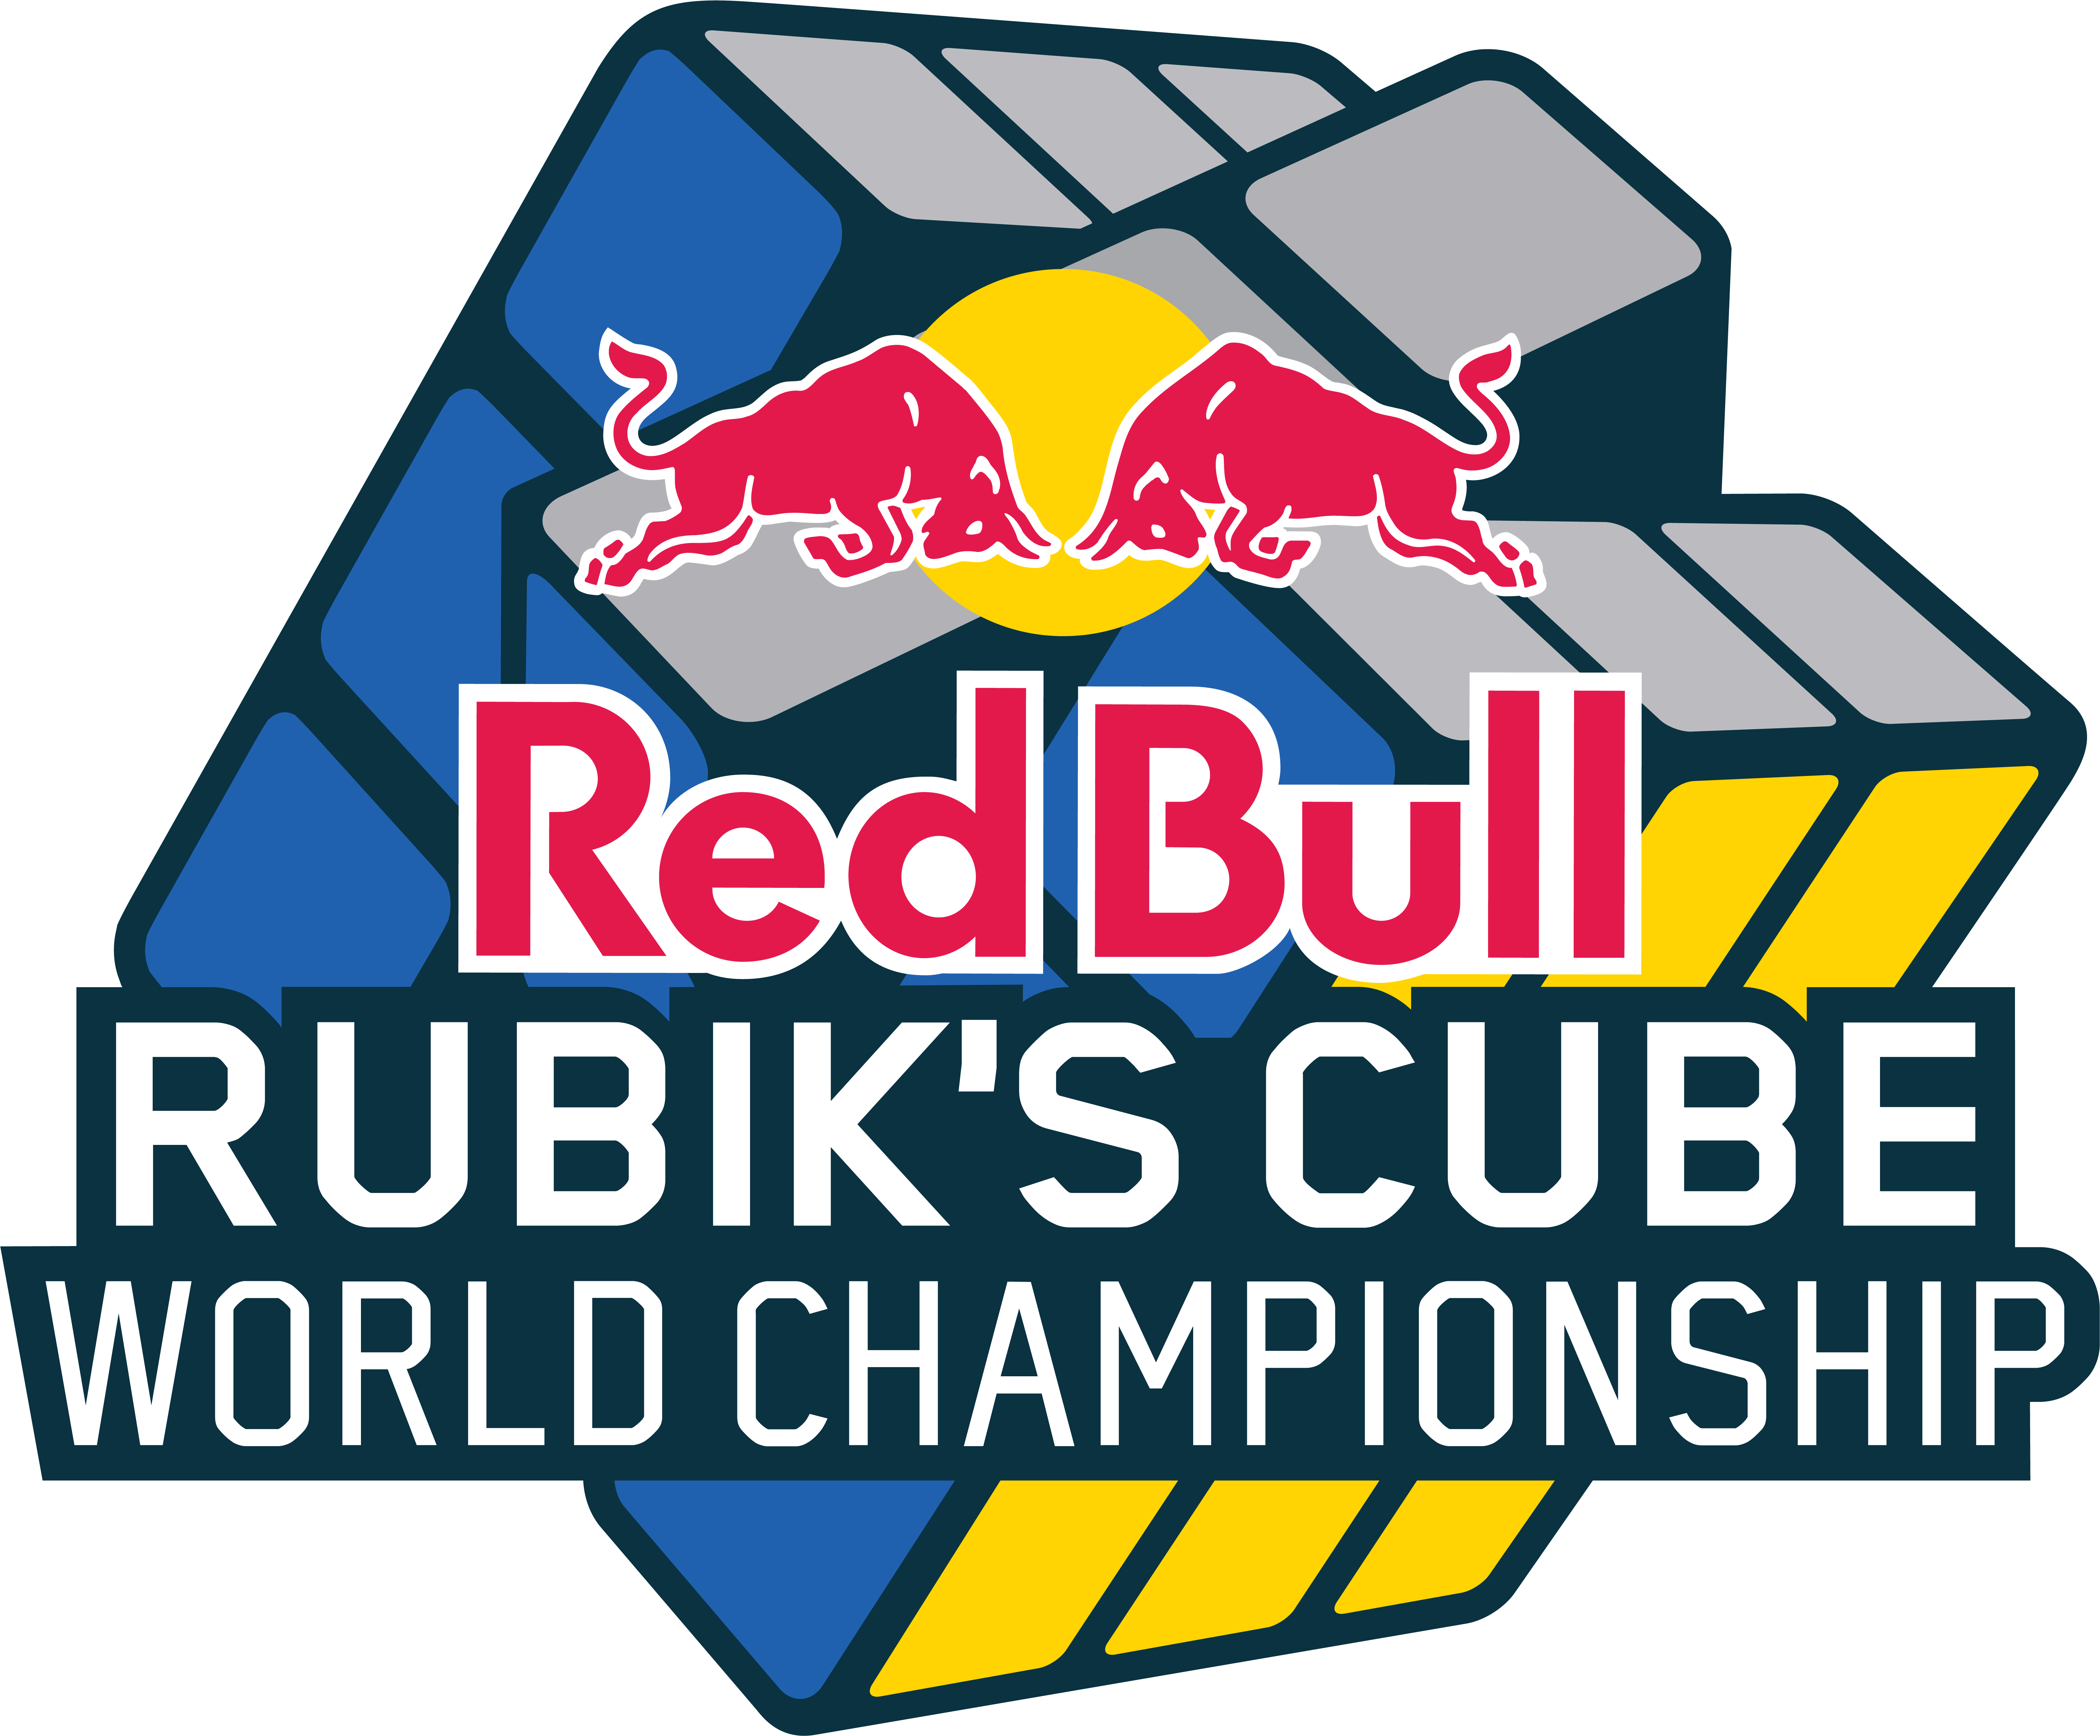 Gallery Of Rubiks Cube Logo Logos Download Expert Magnificent - Red Bull Rubik's Cube World Championship (6650x5518)